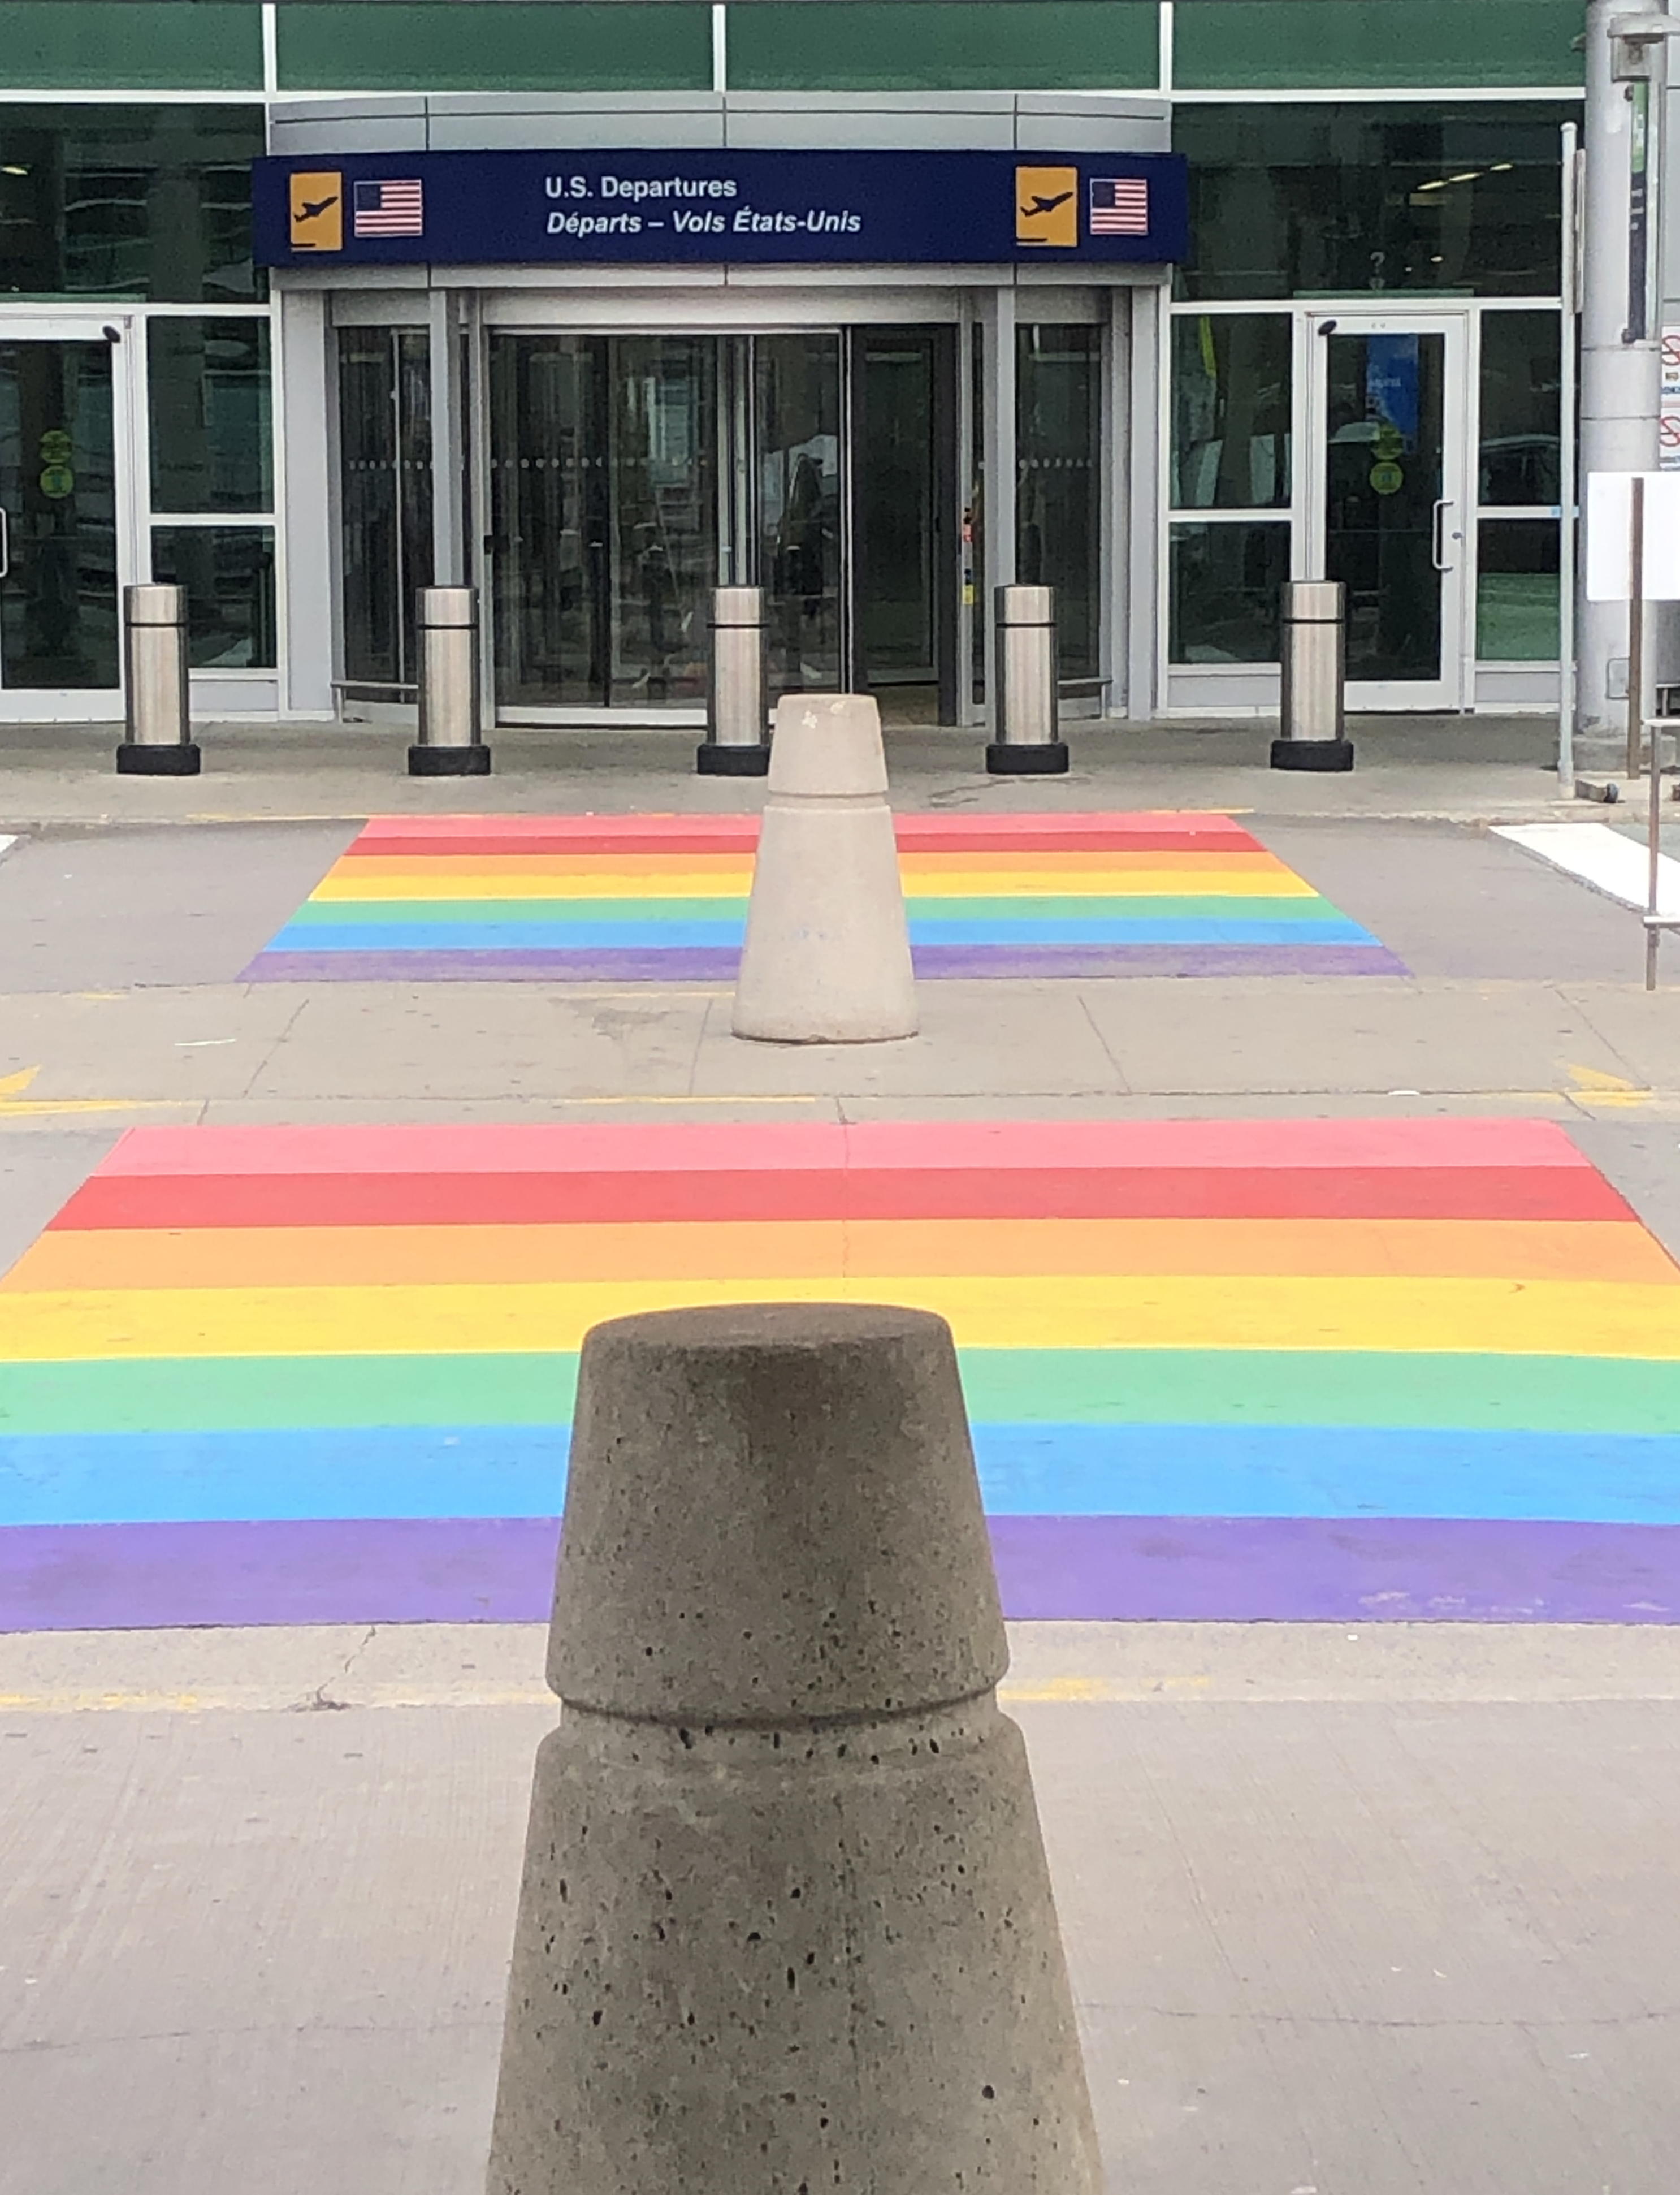 Rainbow sidewalk and airport "US Departures" entrance